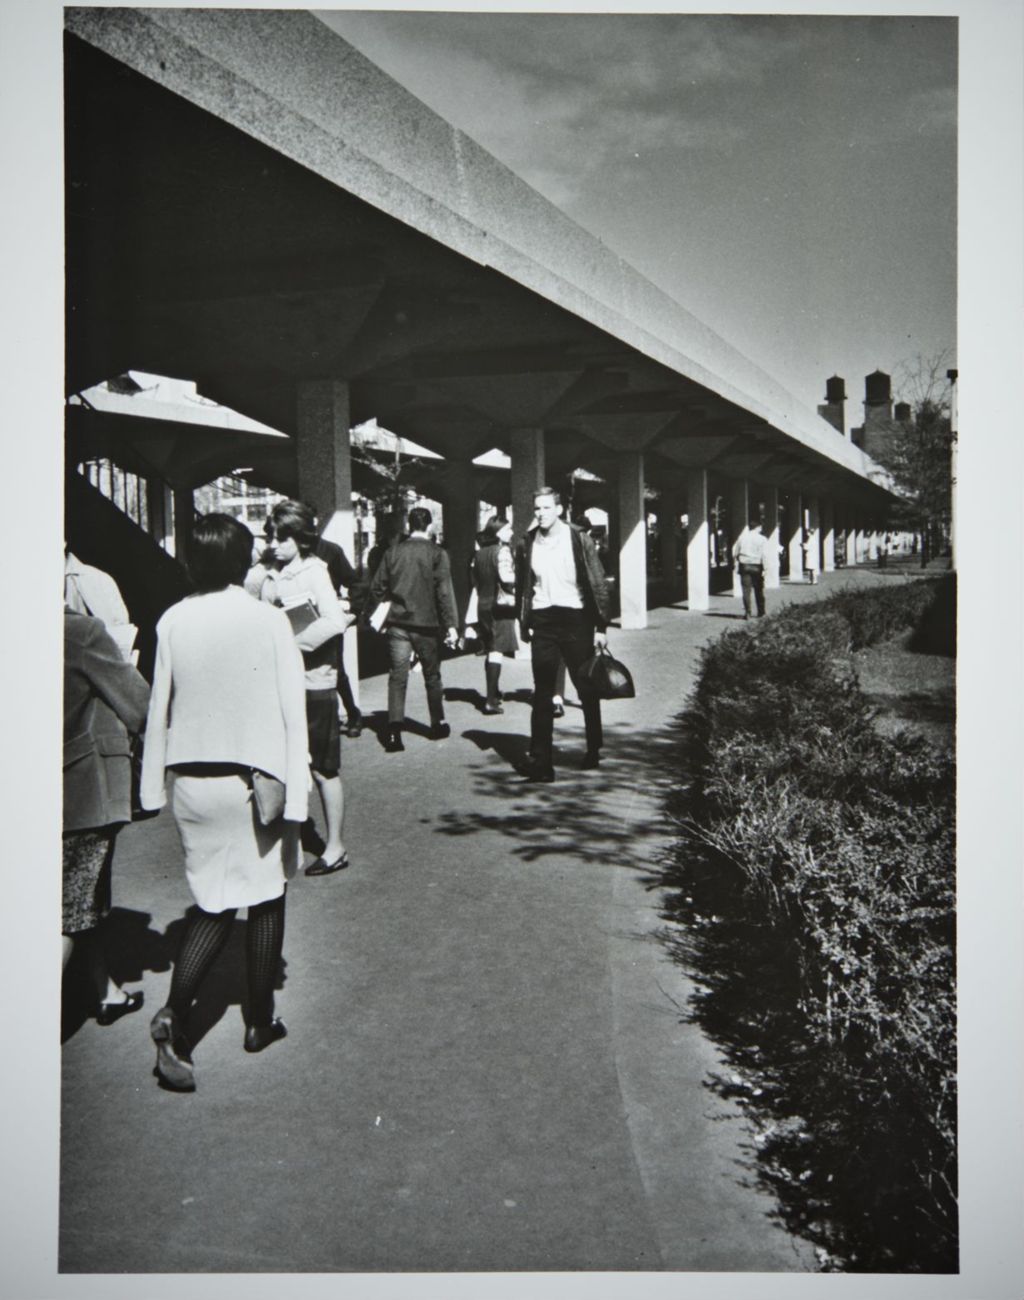 Students walking underneath the elevated walkways on campus